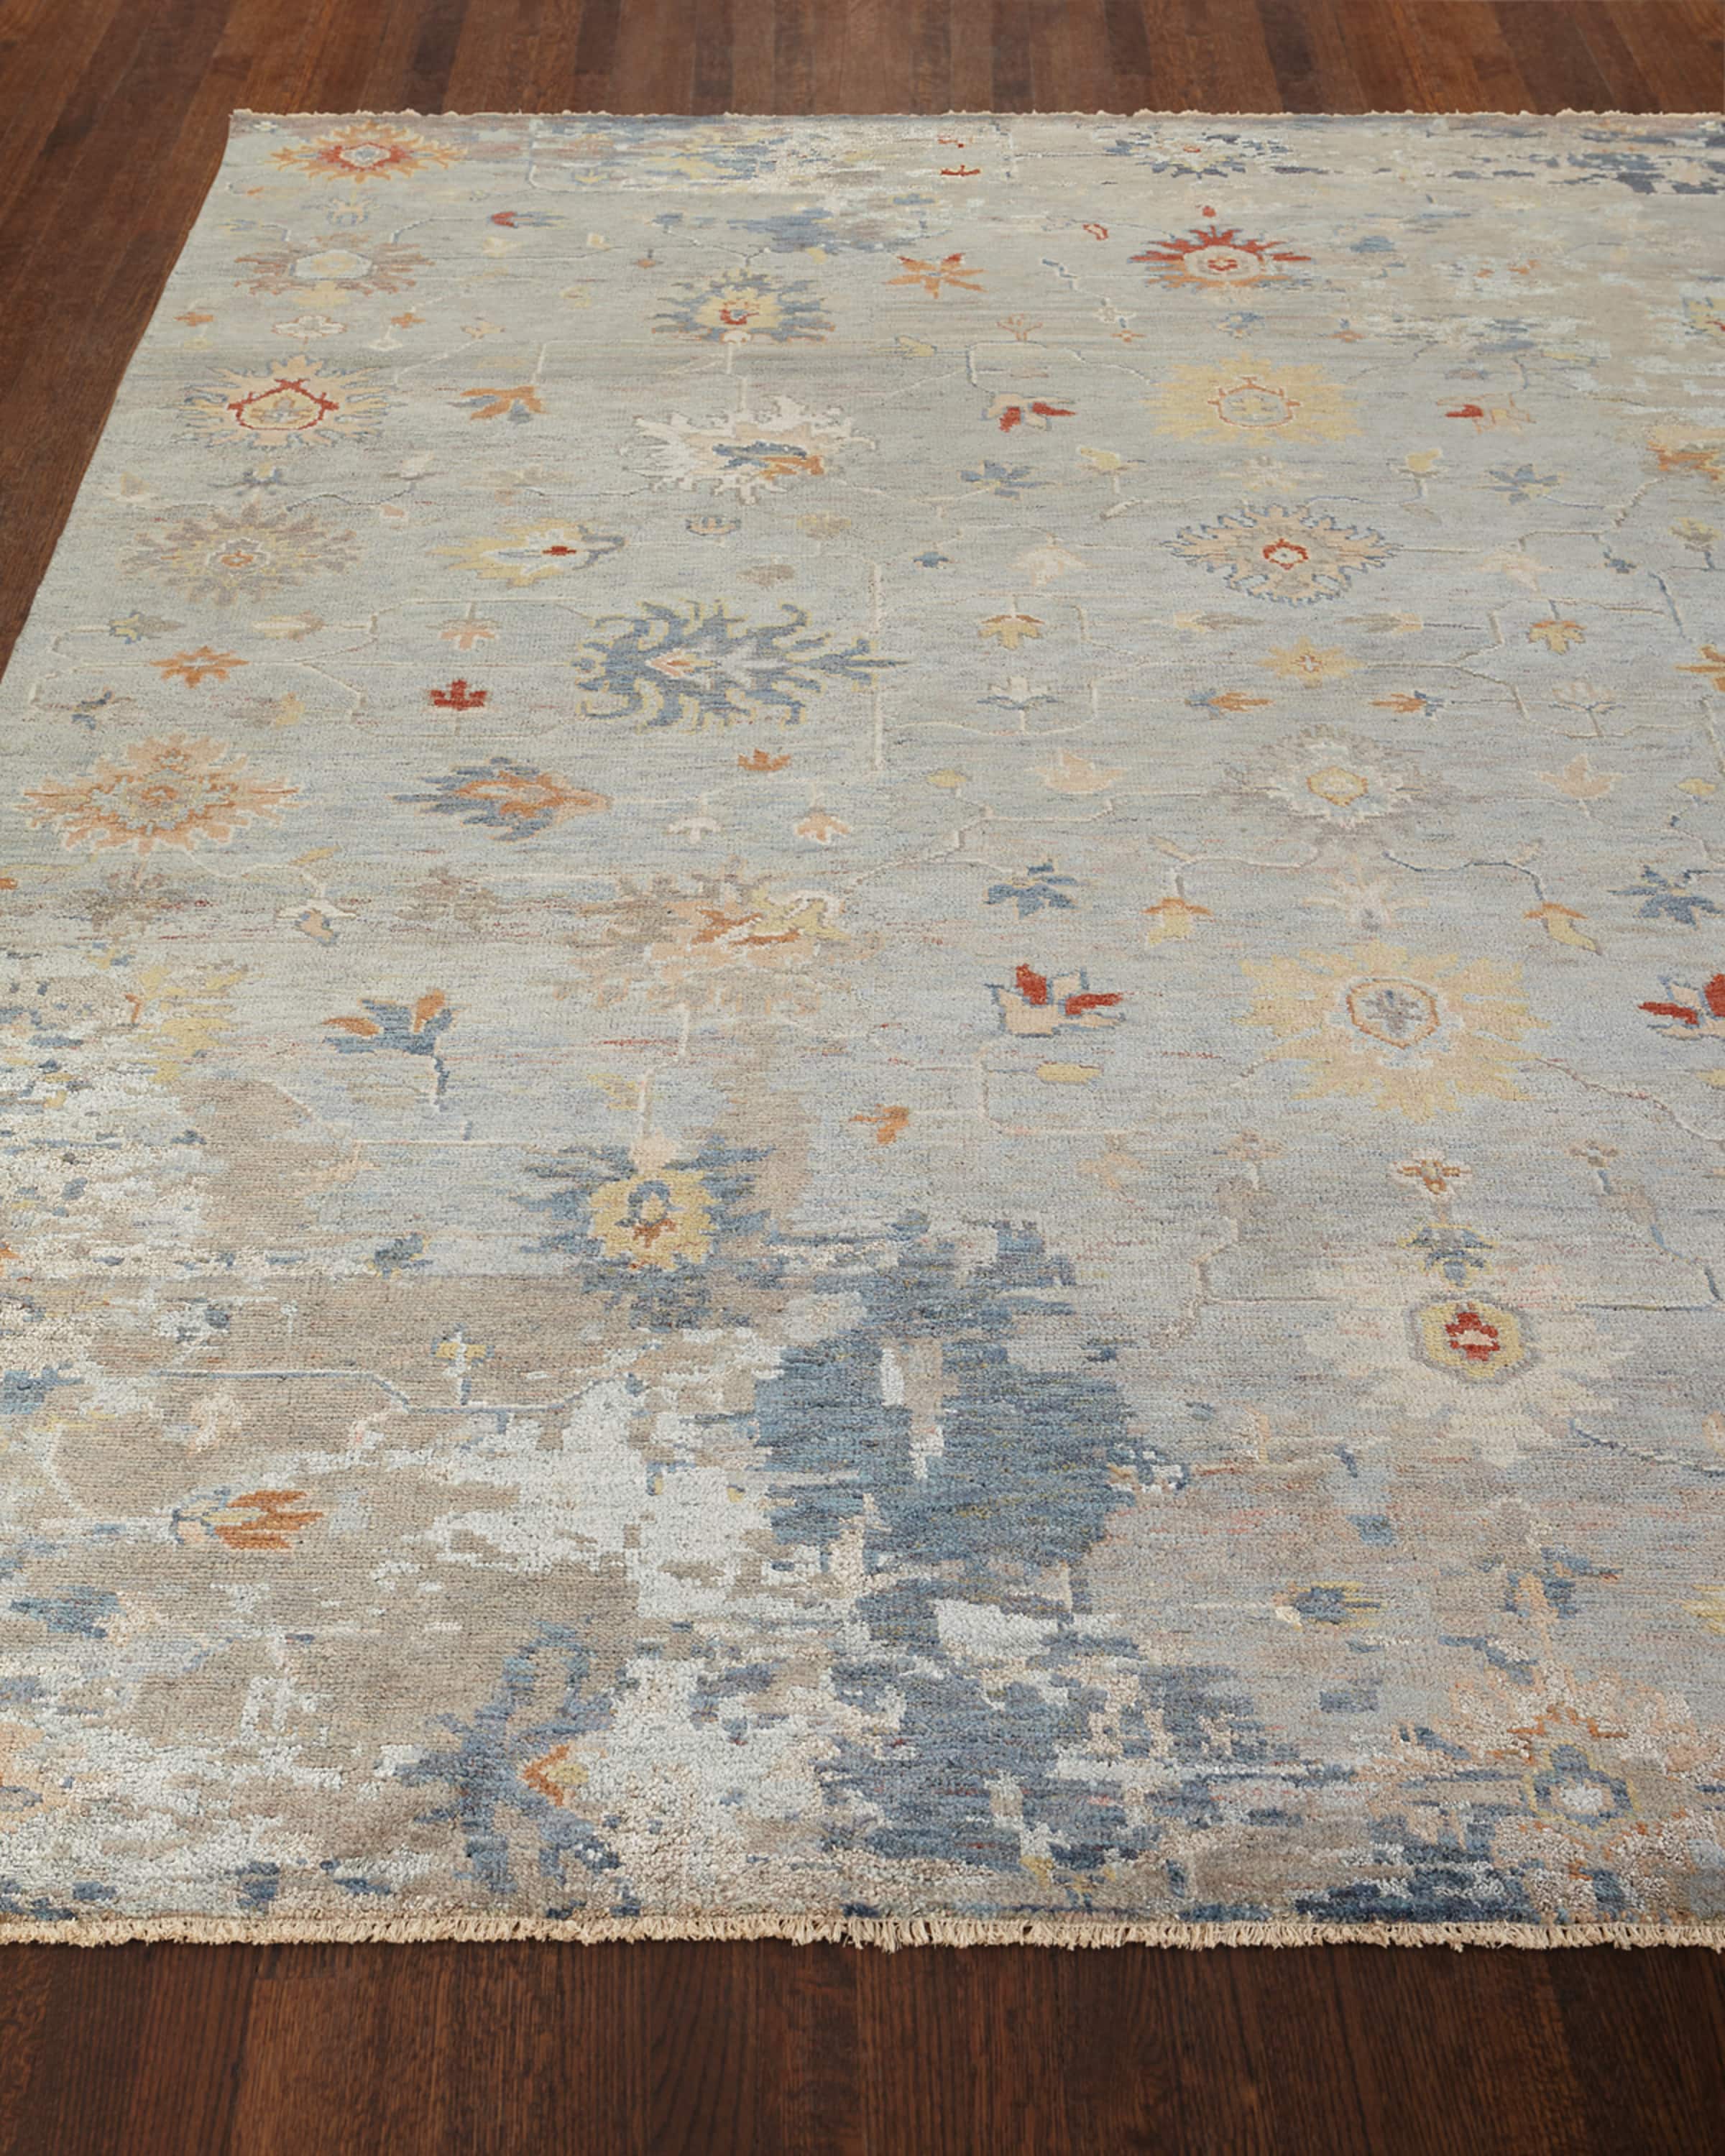 Deleese Hand-Knotted Rug, 6' x 9'